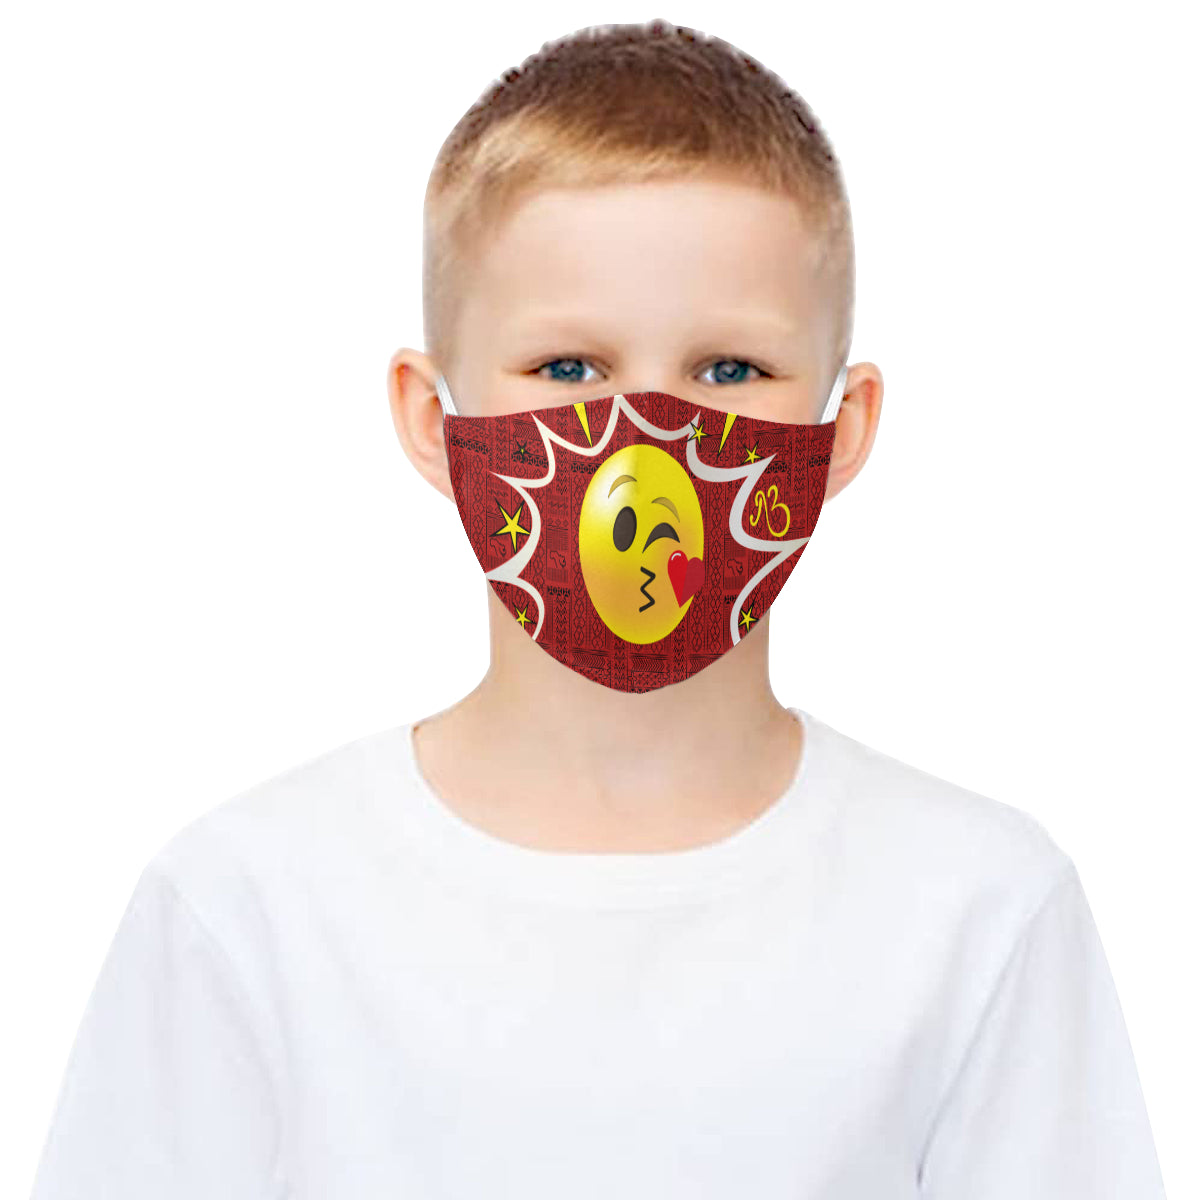 I Care! Tribal Print Comic Emoji Cotton Fabric Face Mask with Filter Slot and Adjustable Strap - Non-medical use (2 Filters Included)